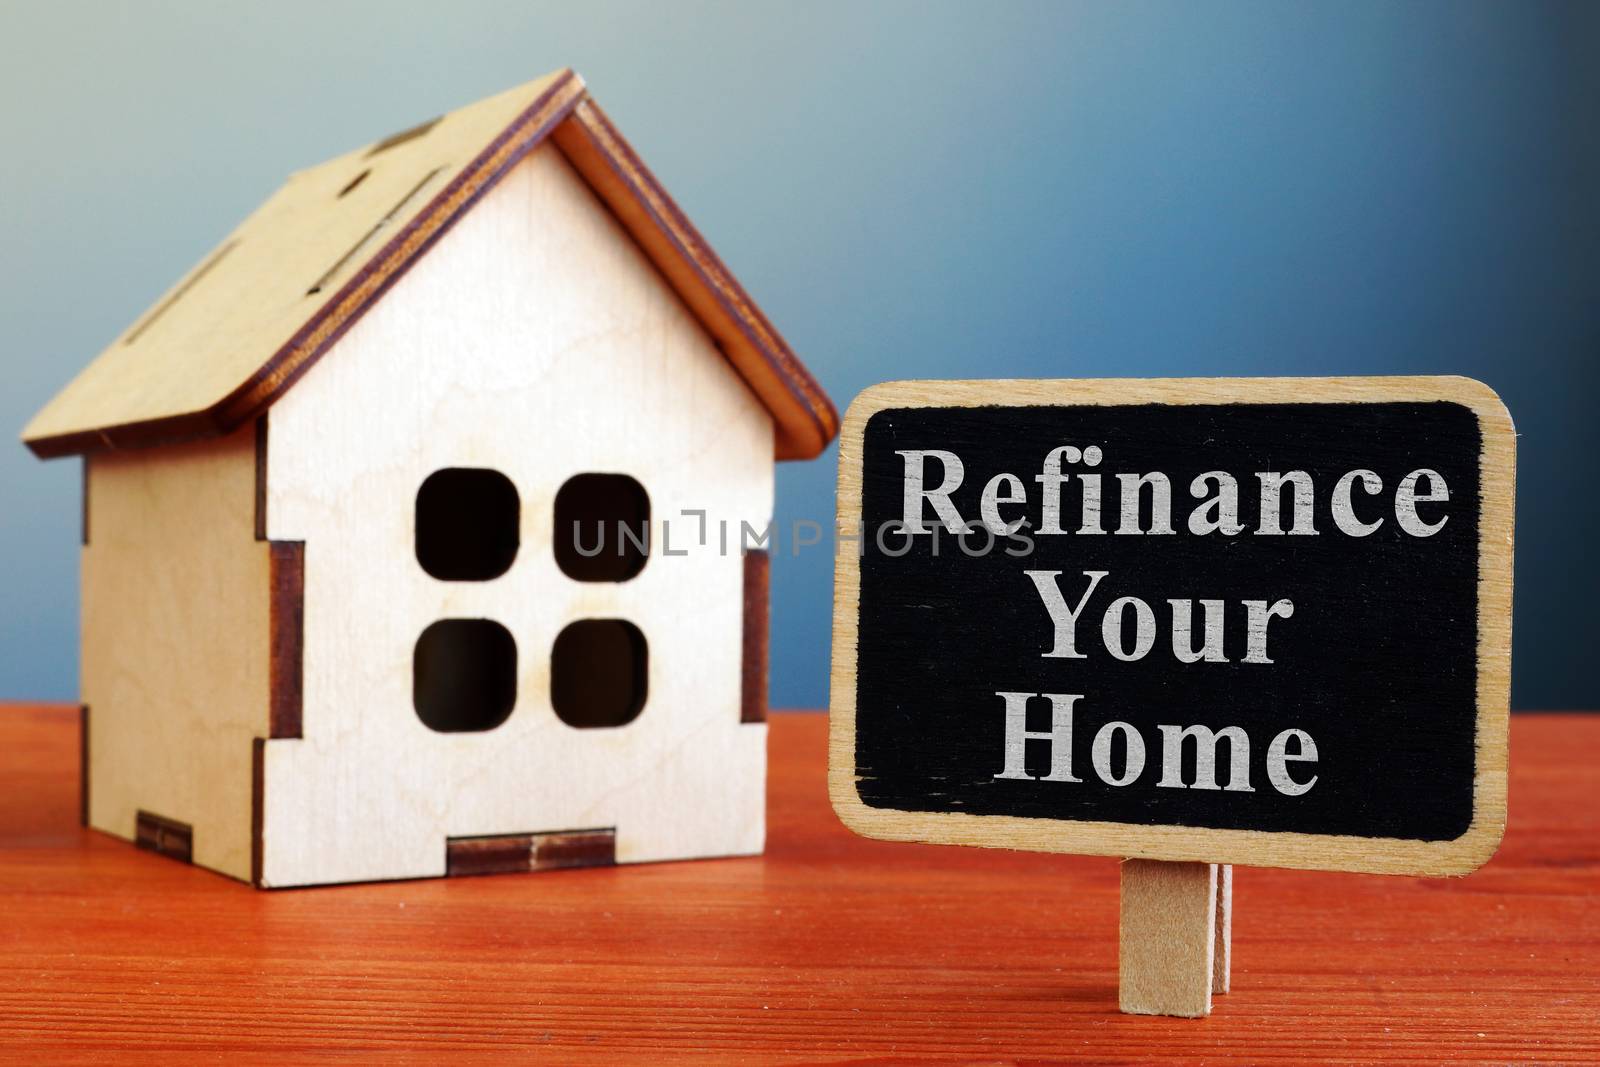 Refinance Your Home mortgage board and wooden house. by designer491